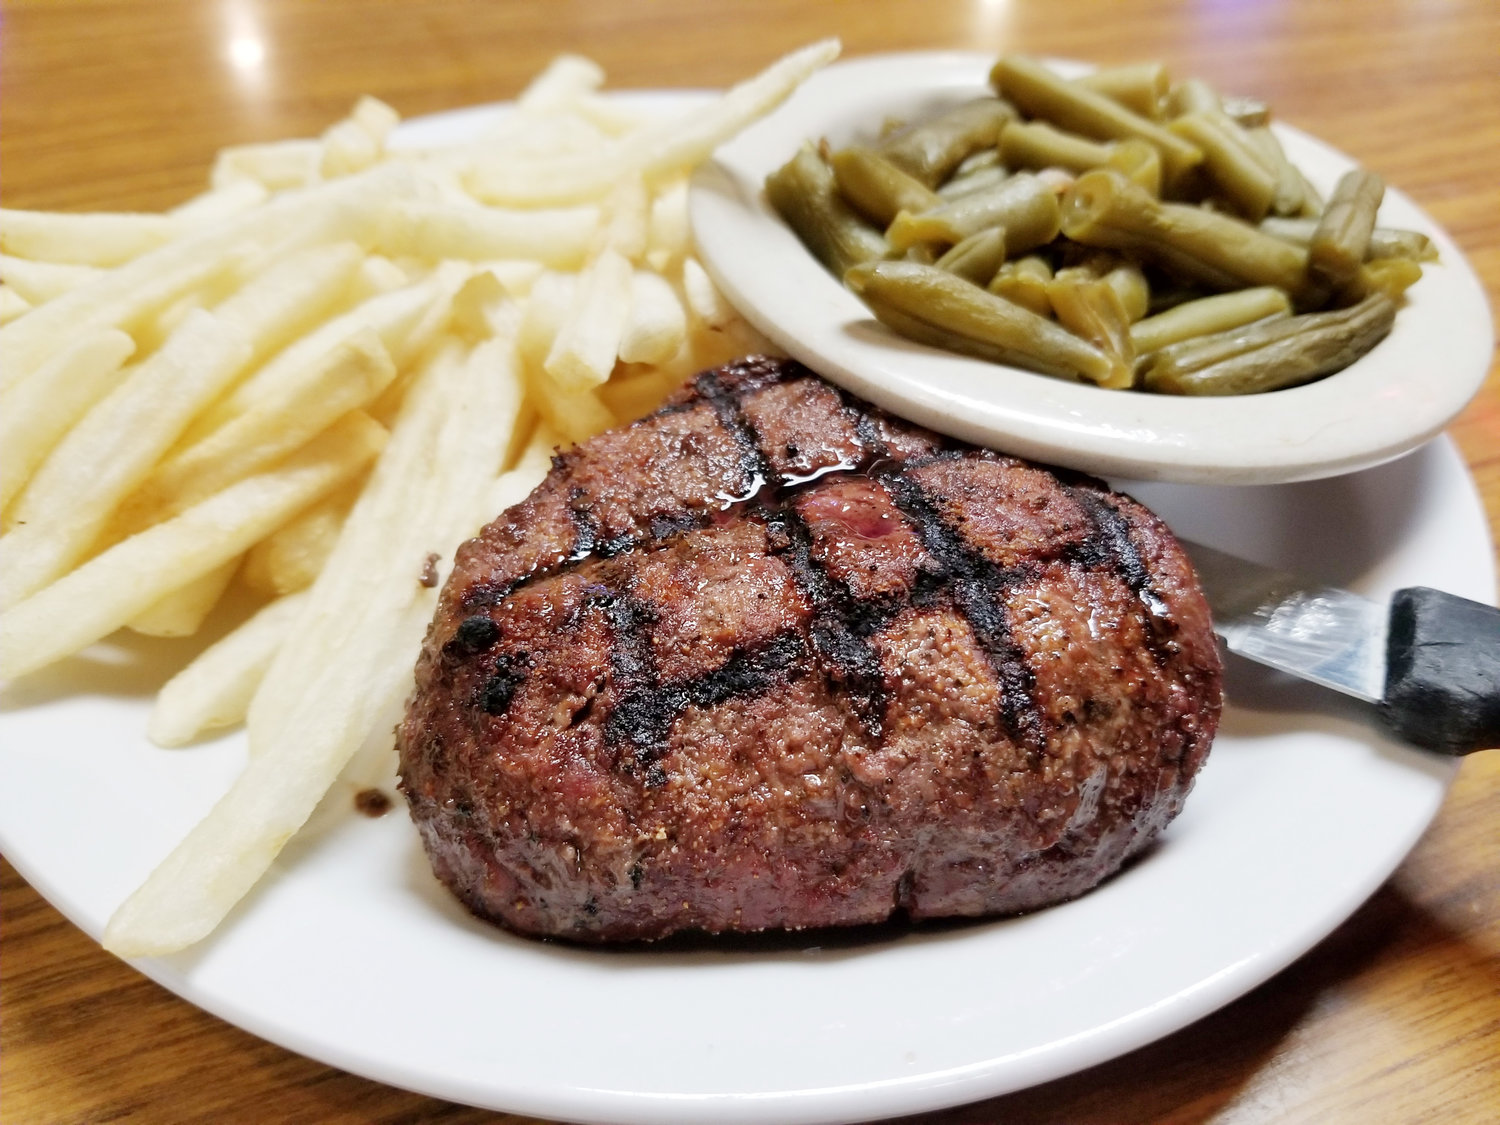 Not all steaks are filling 16-ounce cuts at Teddy Joe's. There are options sized for lunch or smaller appetites, as well. [Dave Faries]